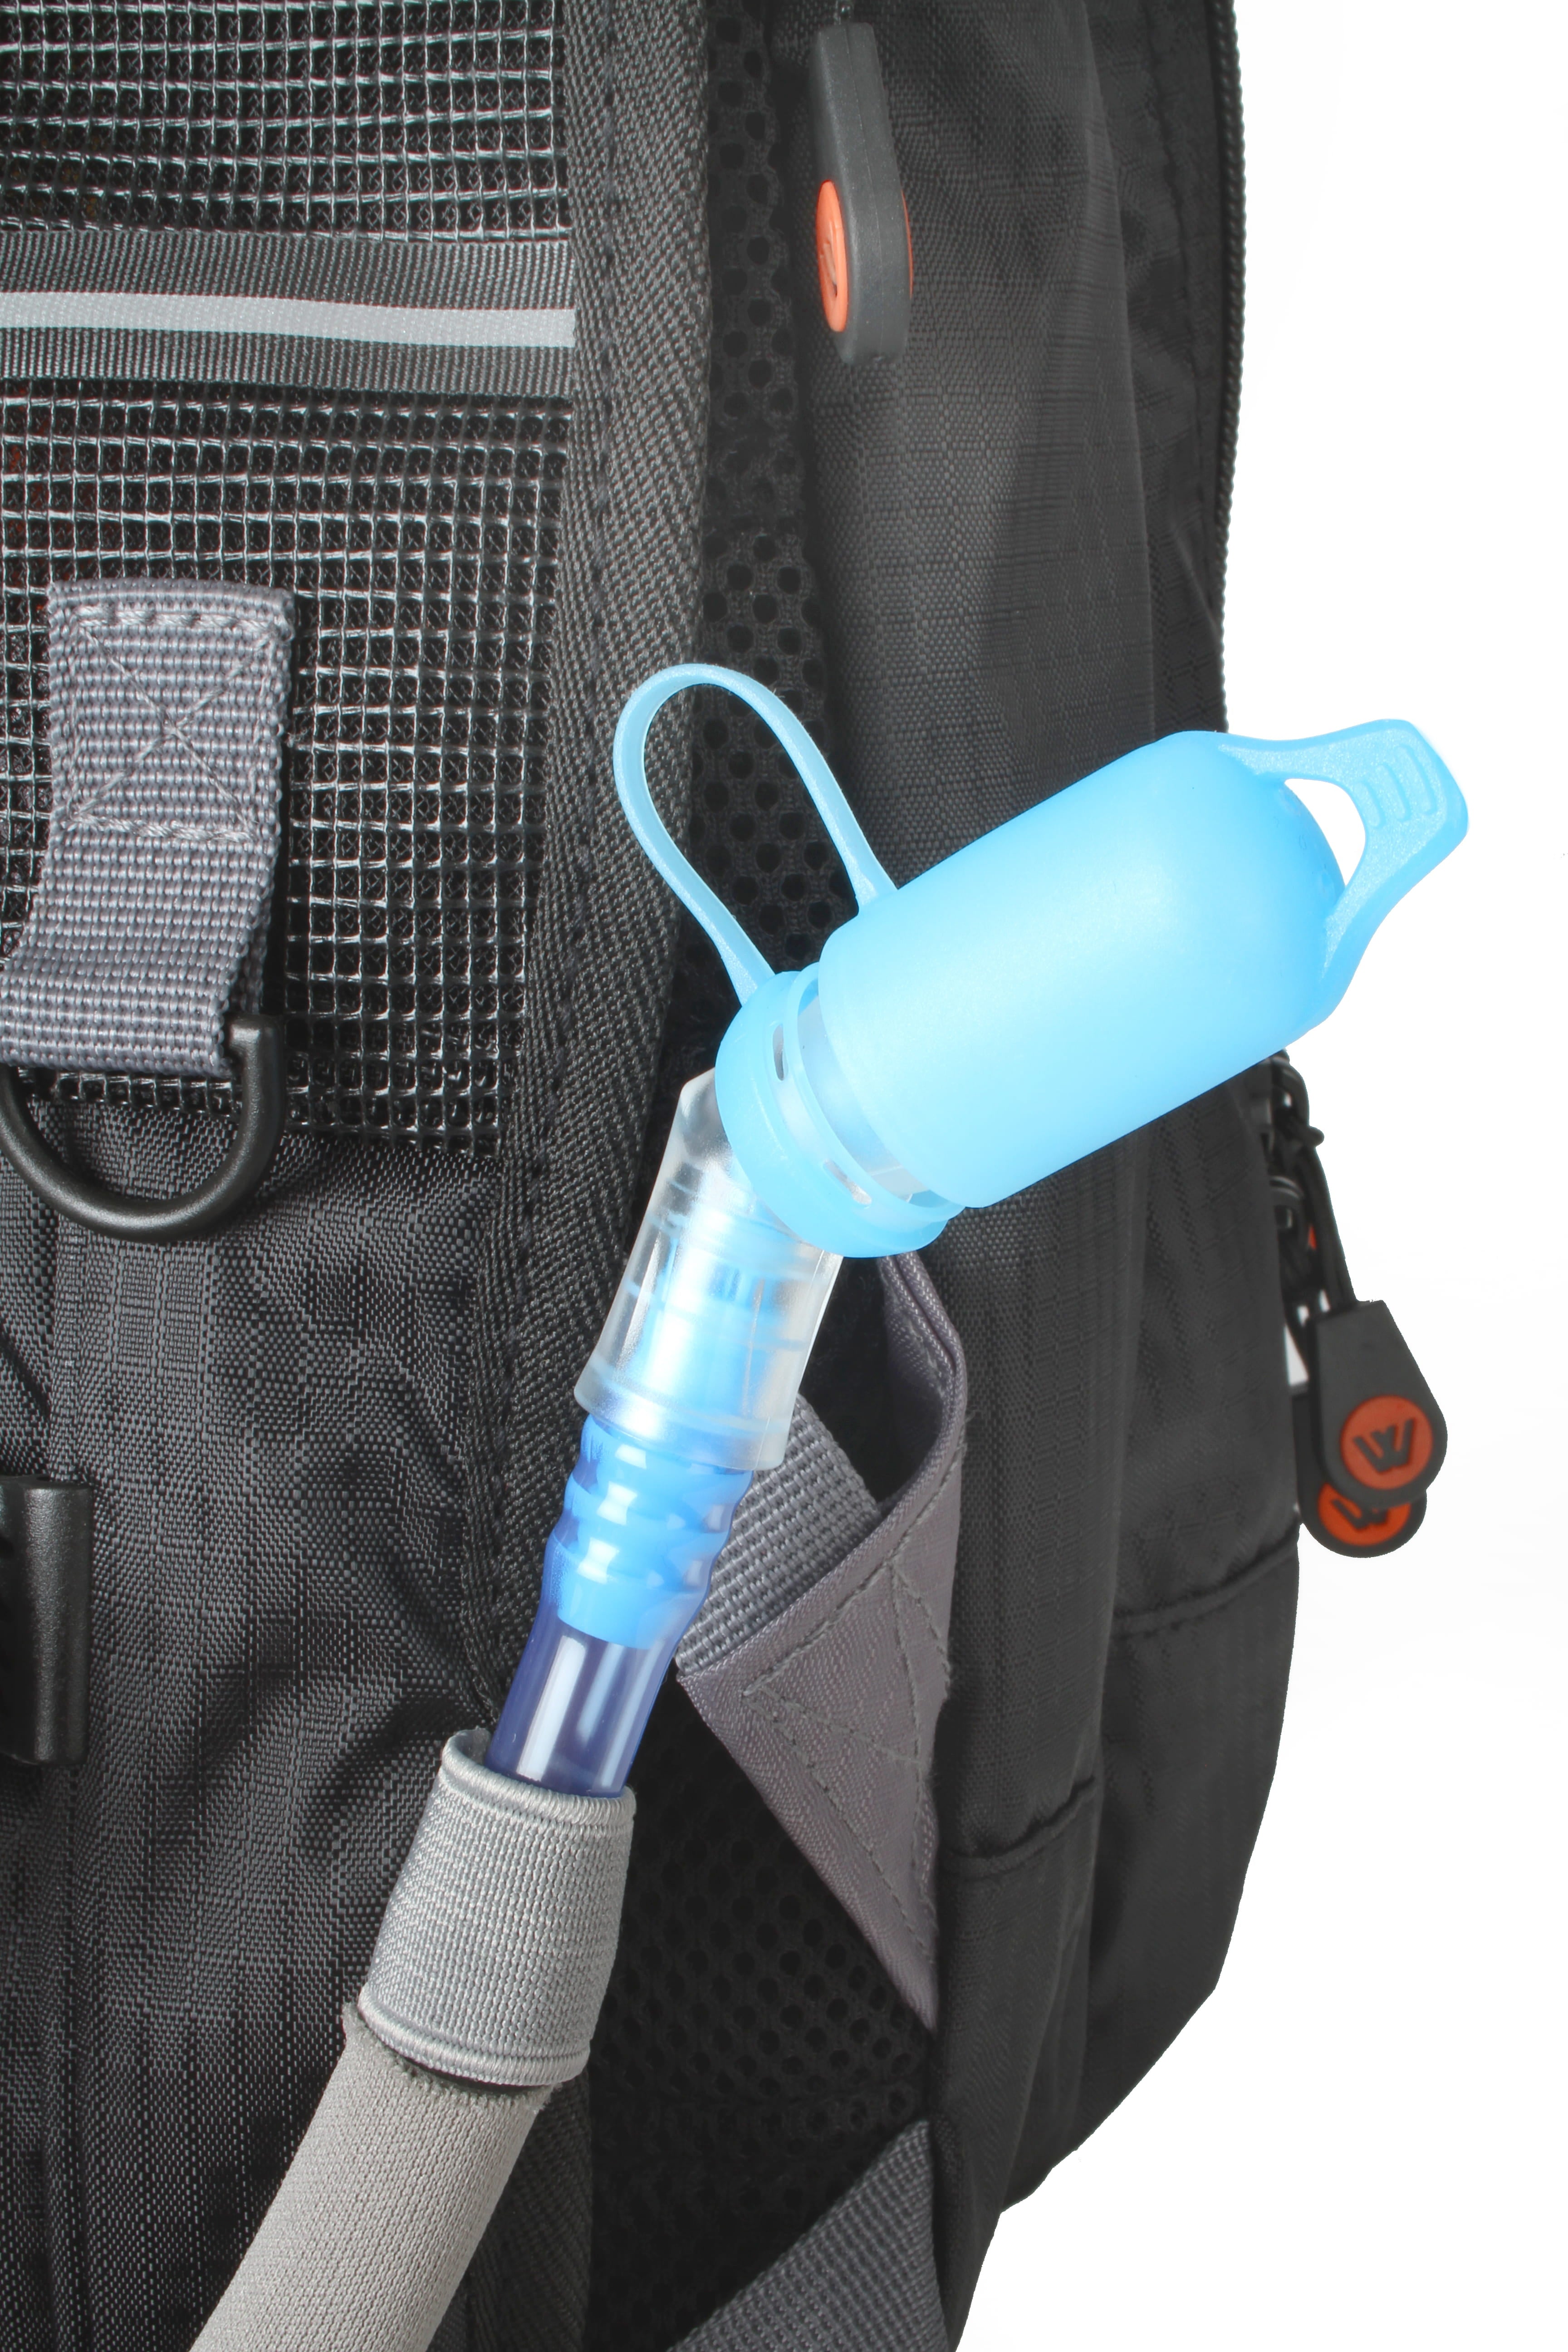 2 LITRE LOOP HYDRATION PACK